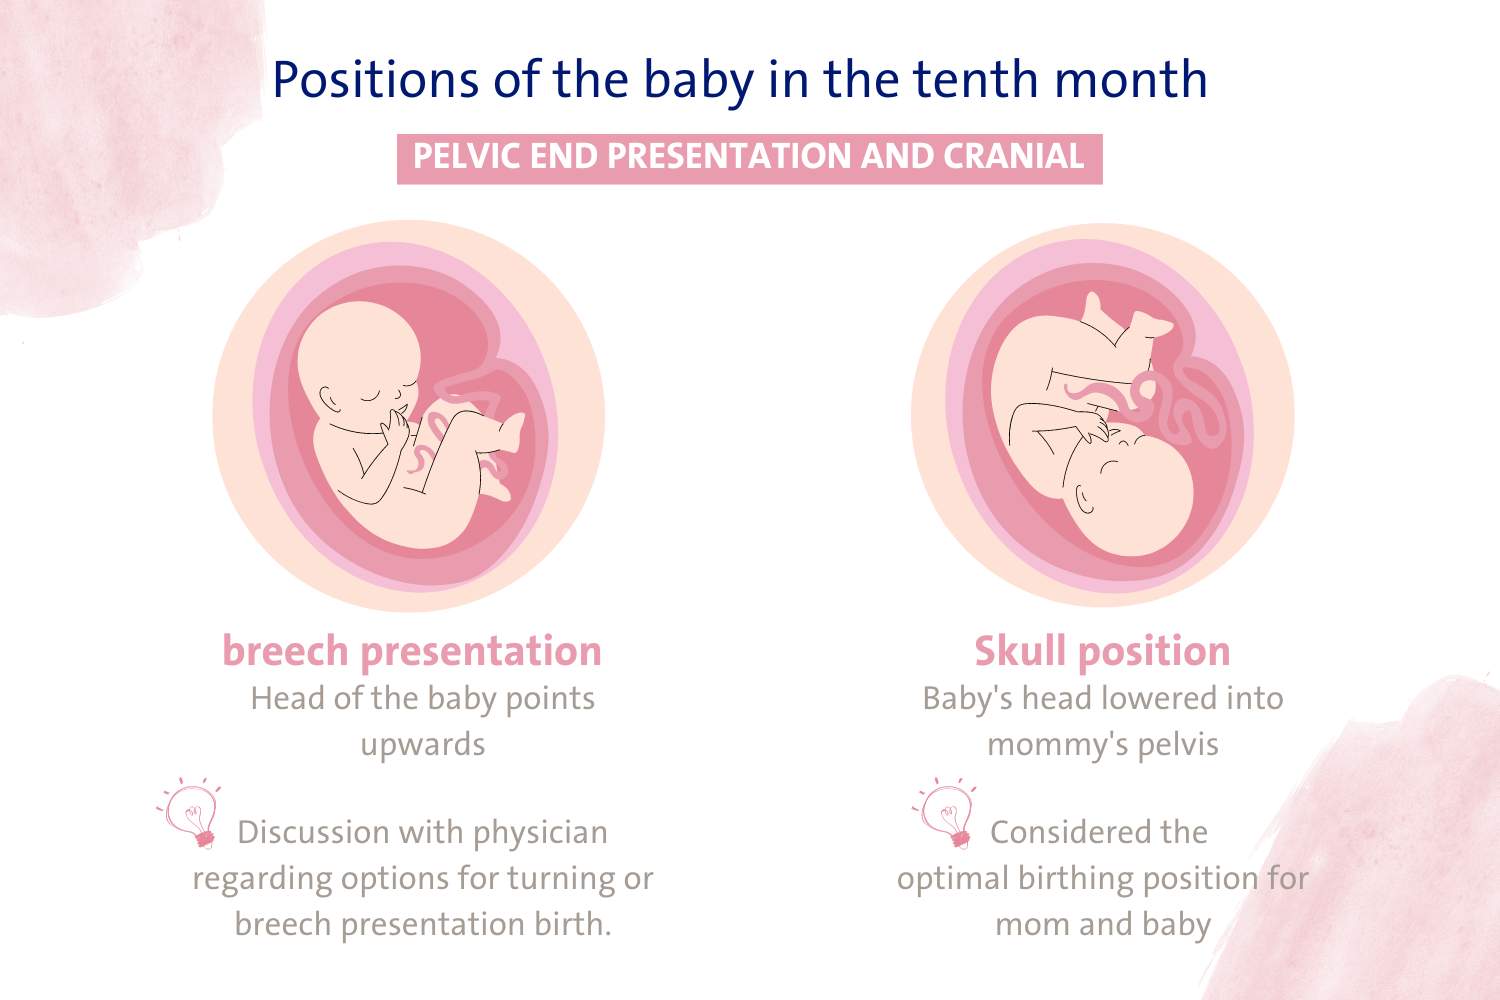 infografic on different birth positions of the baby